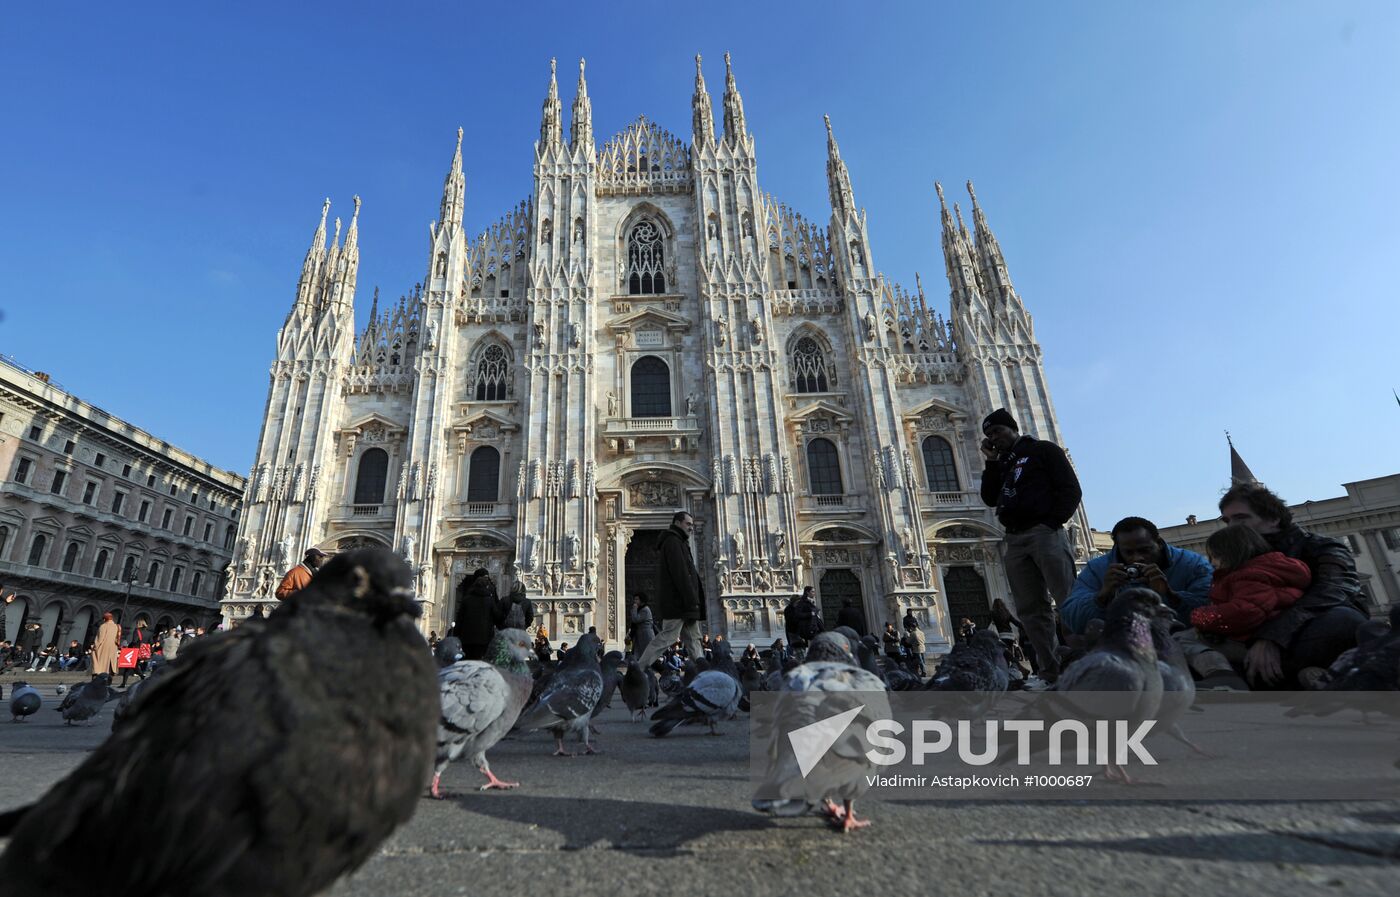 Cities of the World: Milan